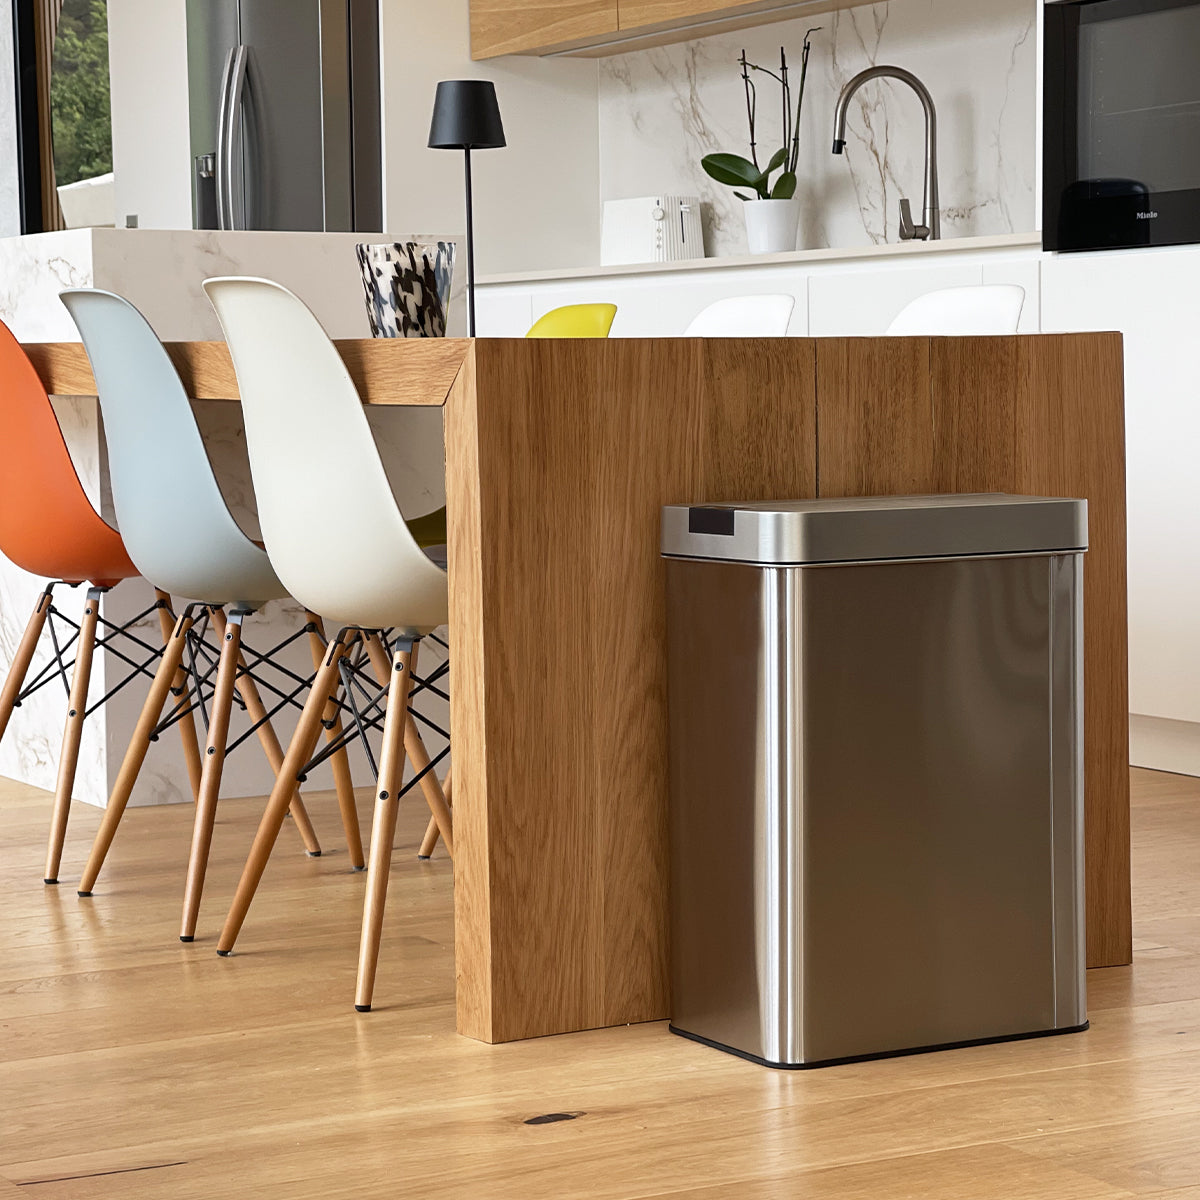 Automatic kitchen bin 60L SILVERLAKE in stainless steel with strapping Large capacity butterfly opening